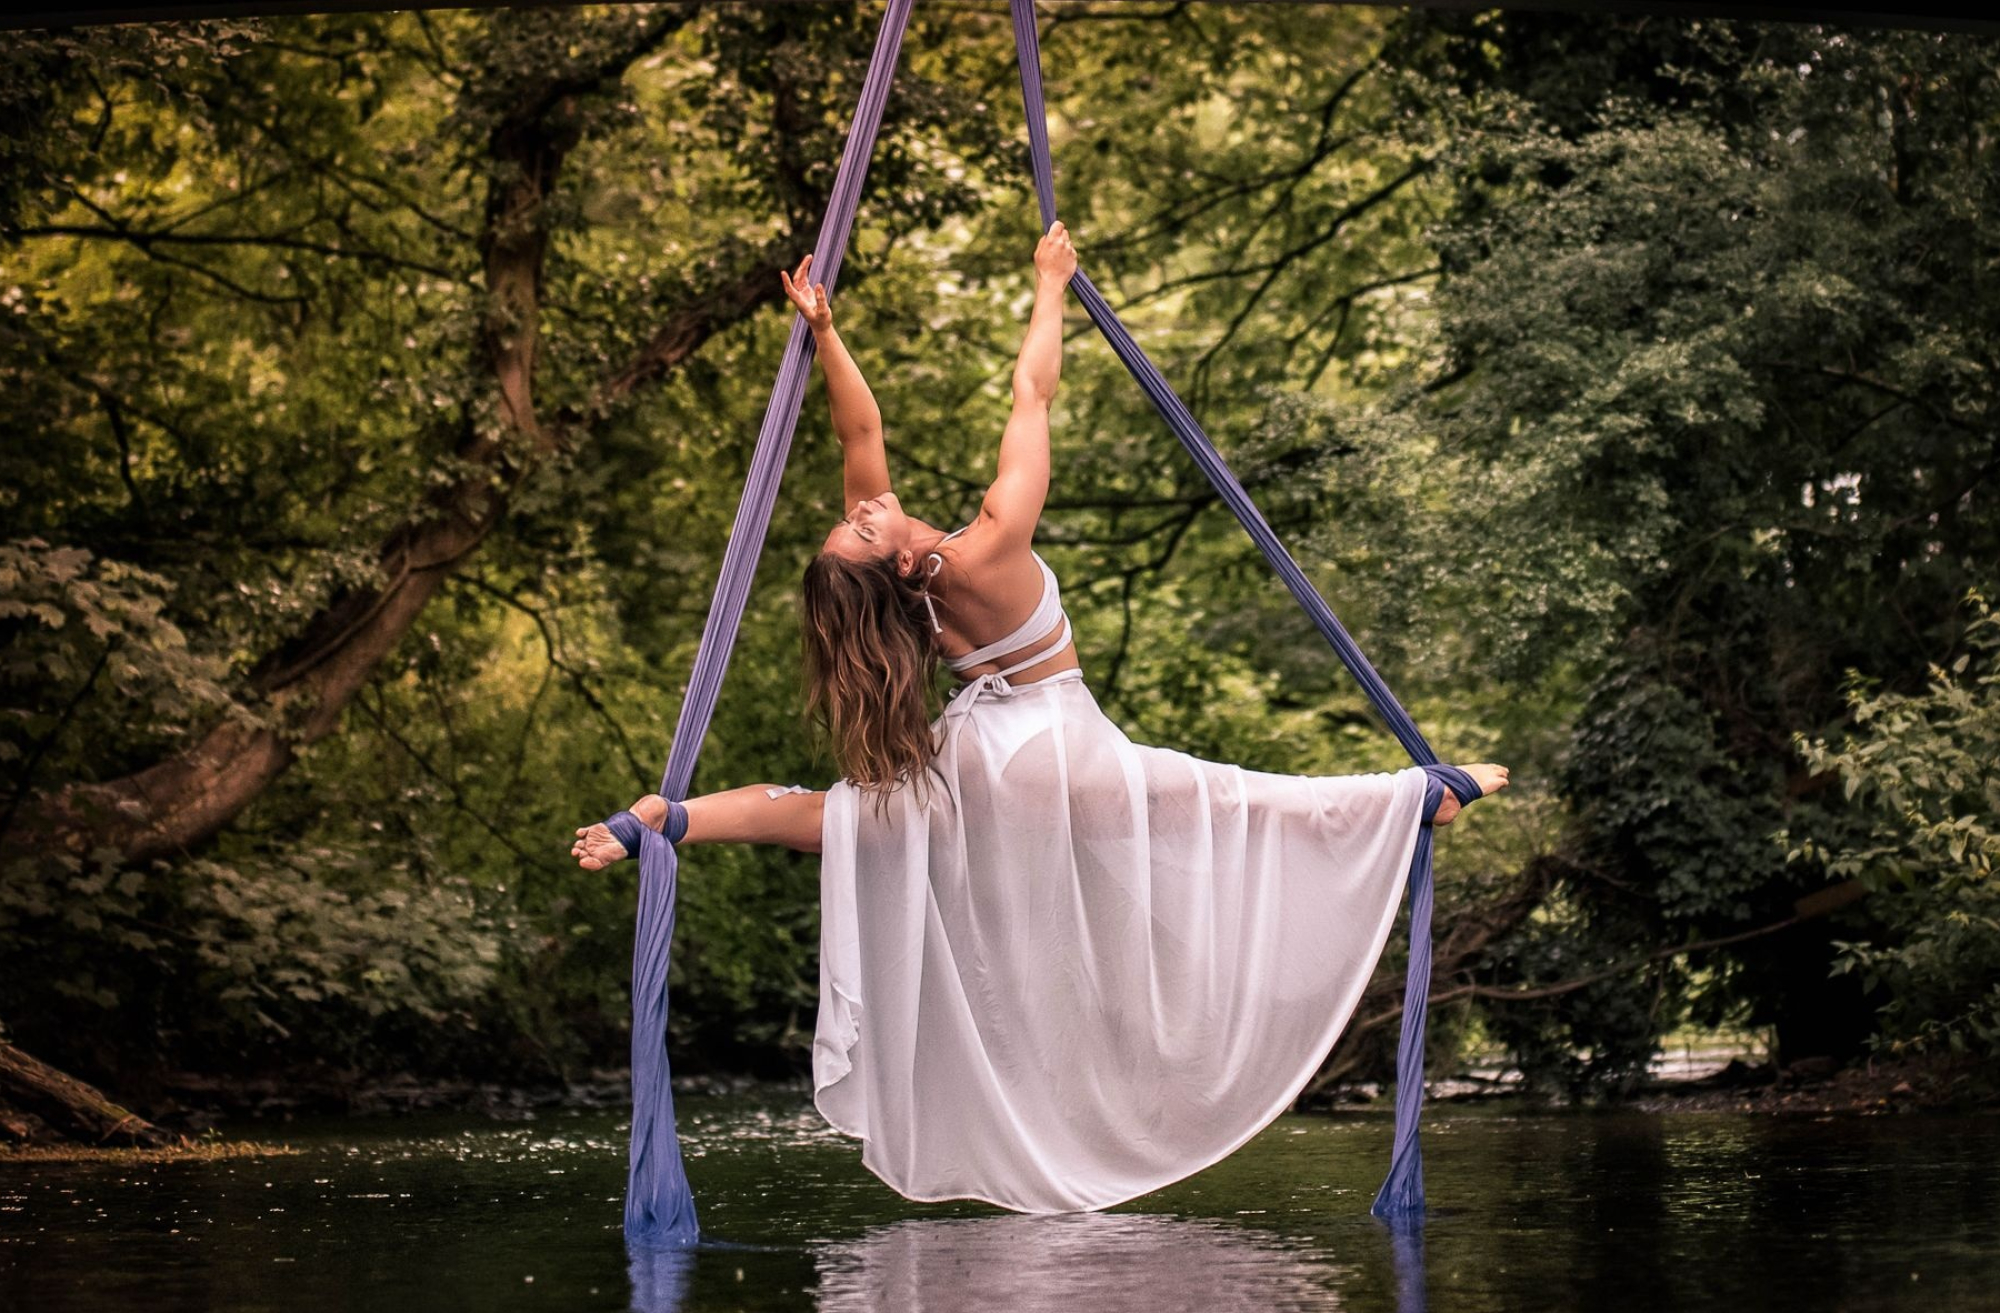 Aerial Silks: Artistic choreography in the air performed by a gymnast flying above the river. 2000x1320 HD Background.